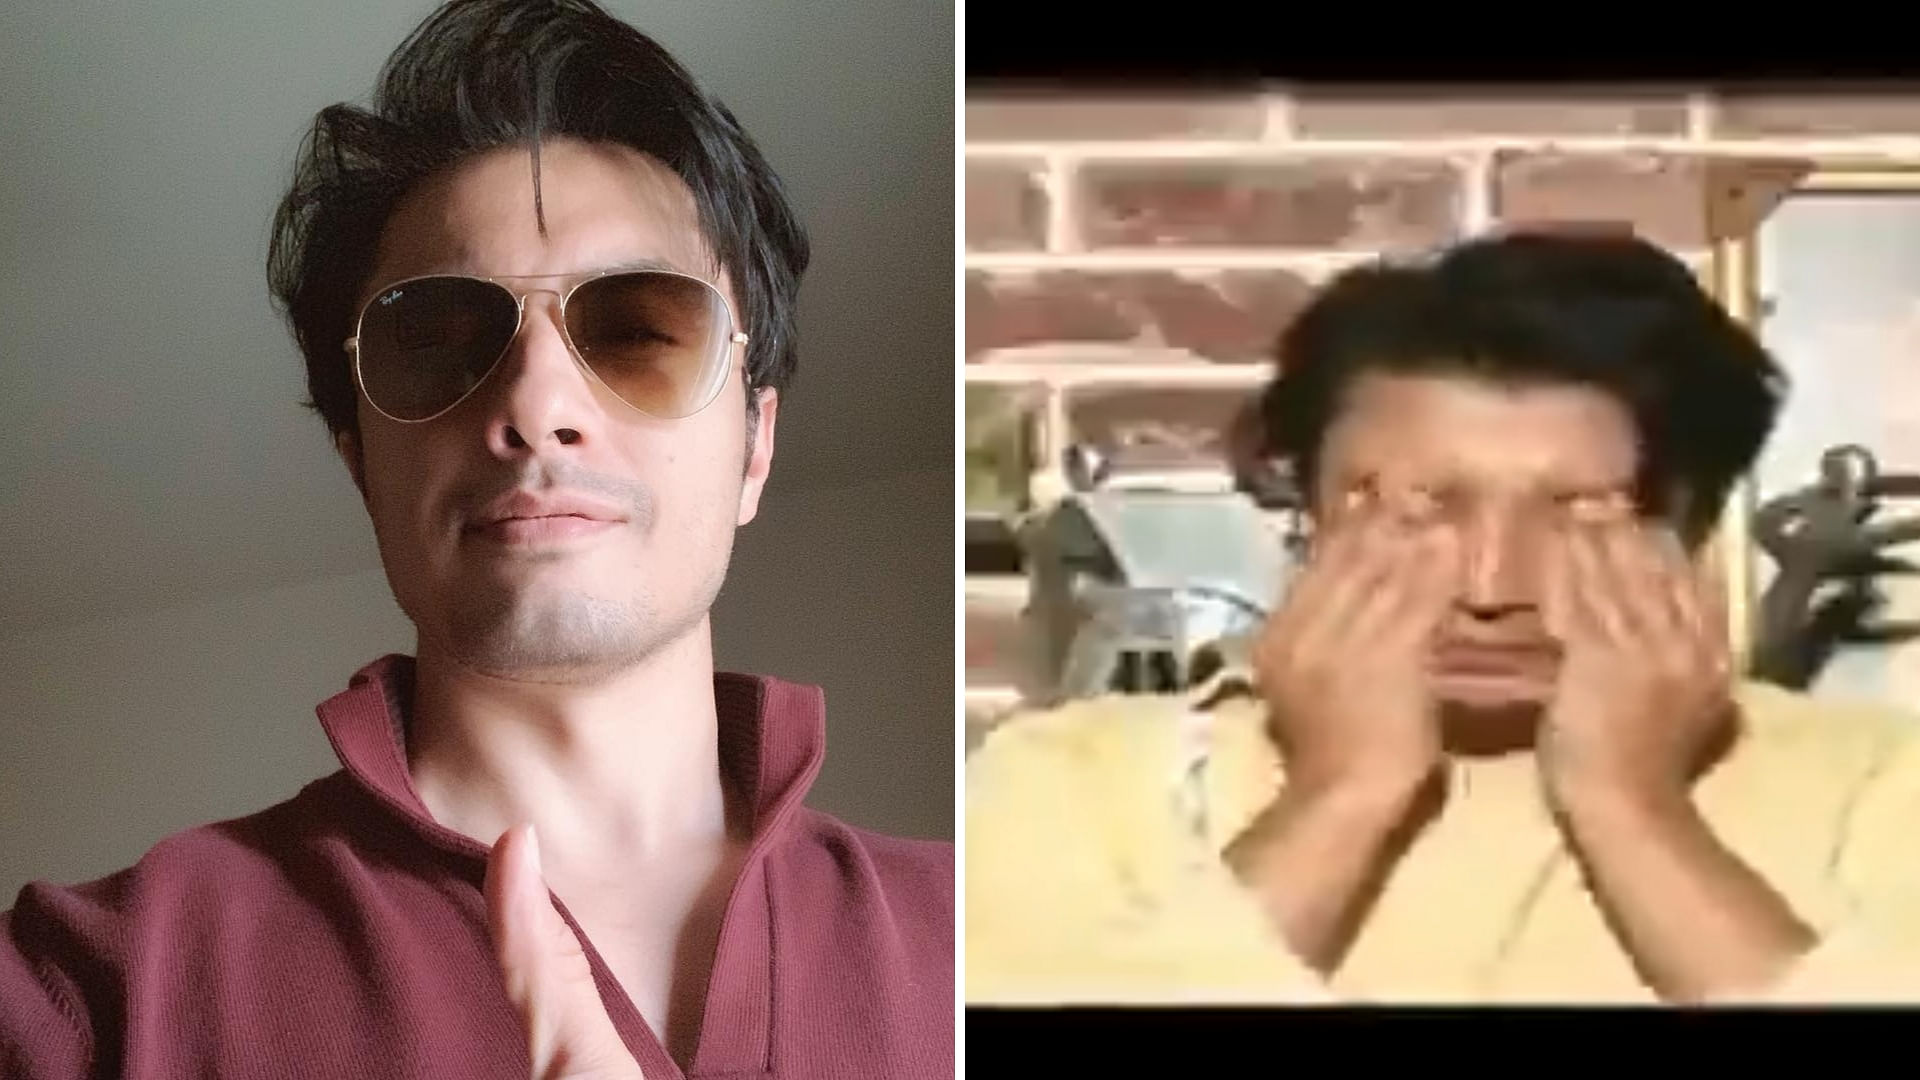 Ali Zafar was accused of sexual harassment in April 2018 by Meesha Shafi.